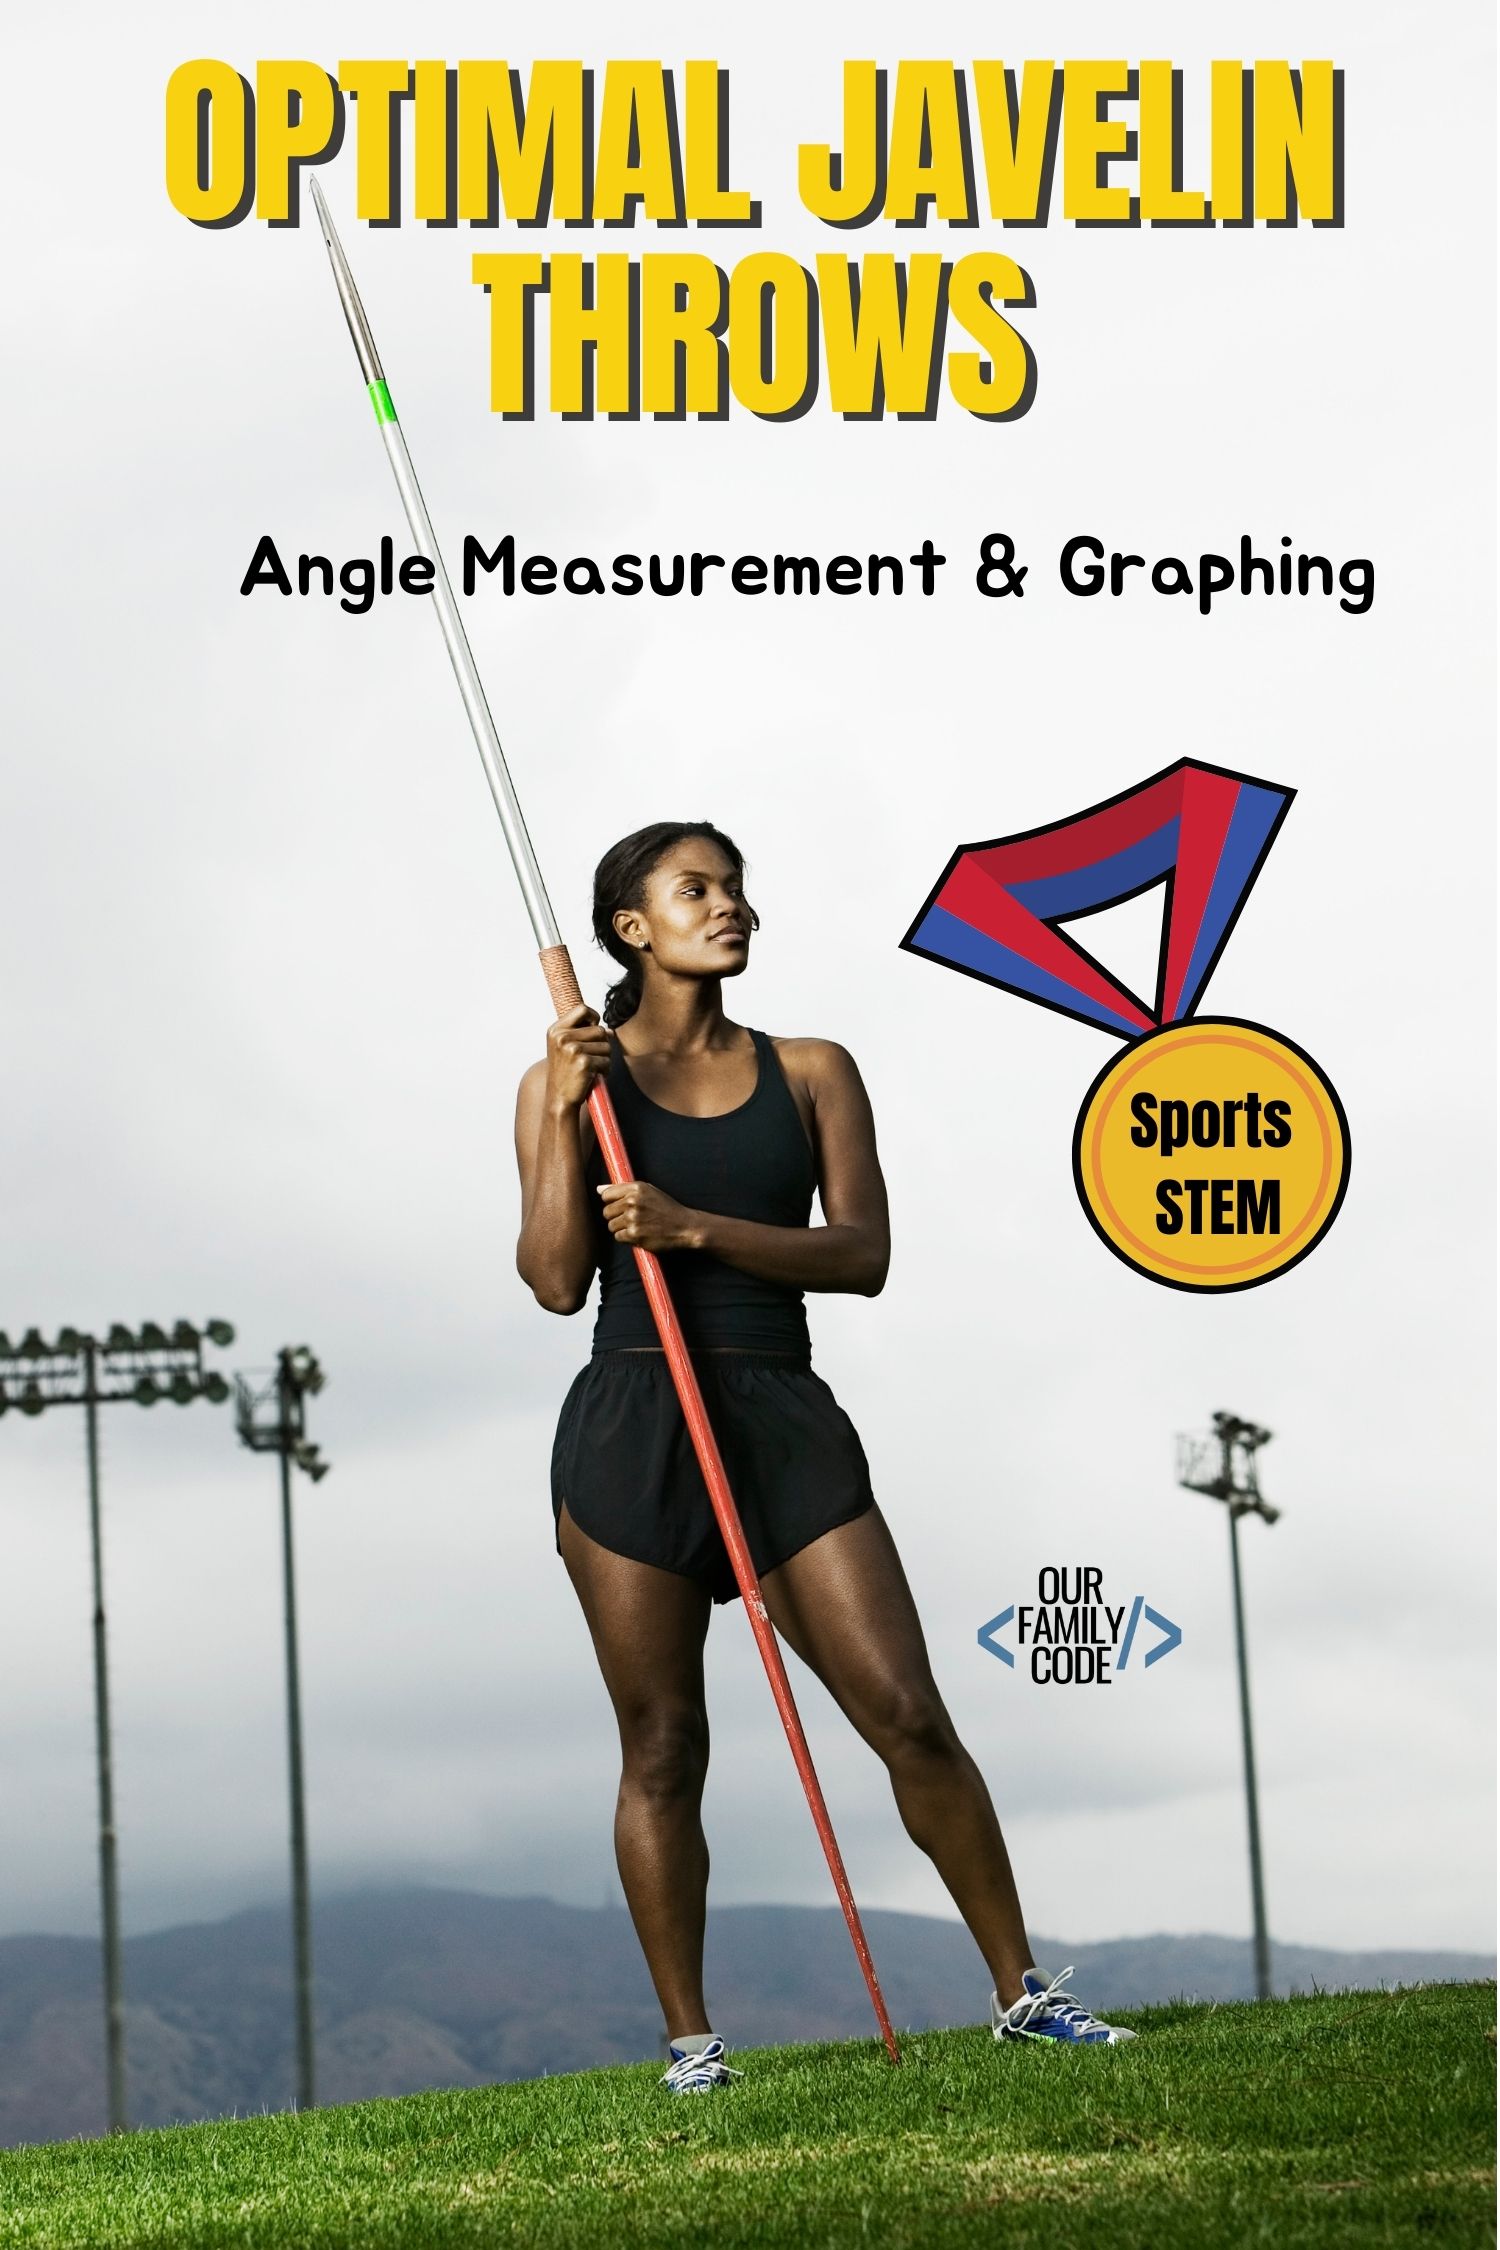 A picture of a javelin athlete standing with a javelin with text in yellow that says "optimal javelin throws", text in black that says "angle measurement and graphing", and a medal that says "sports STEM".